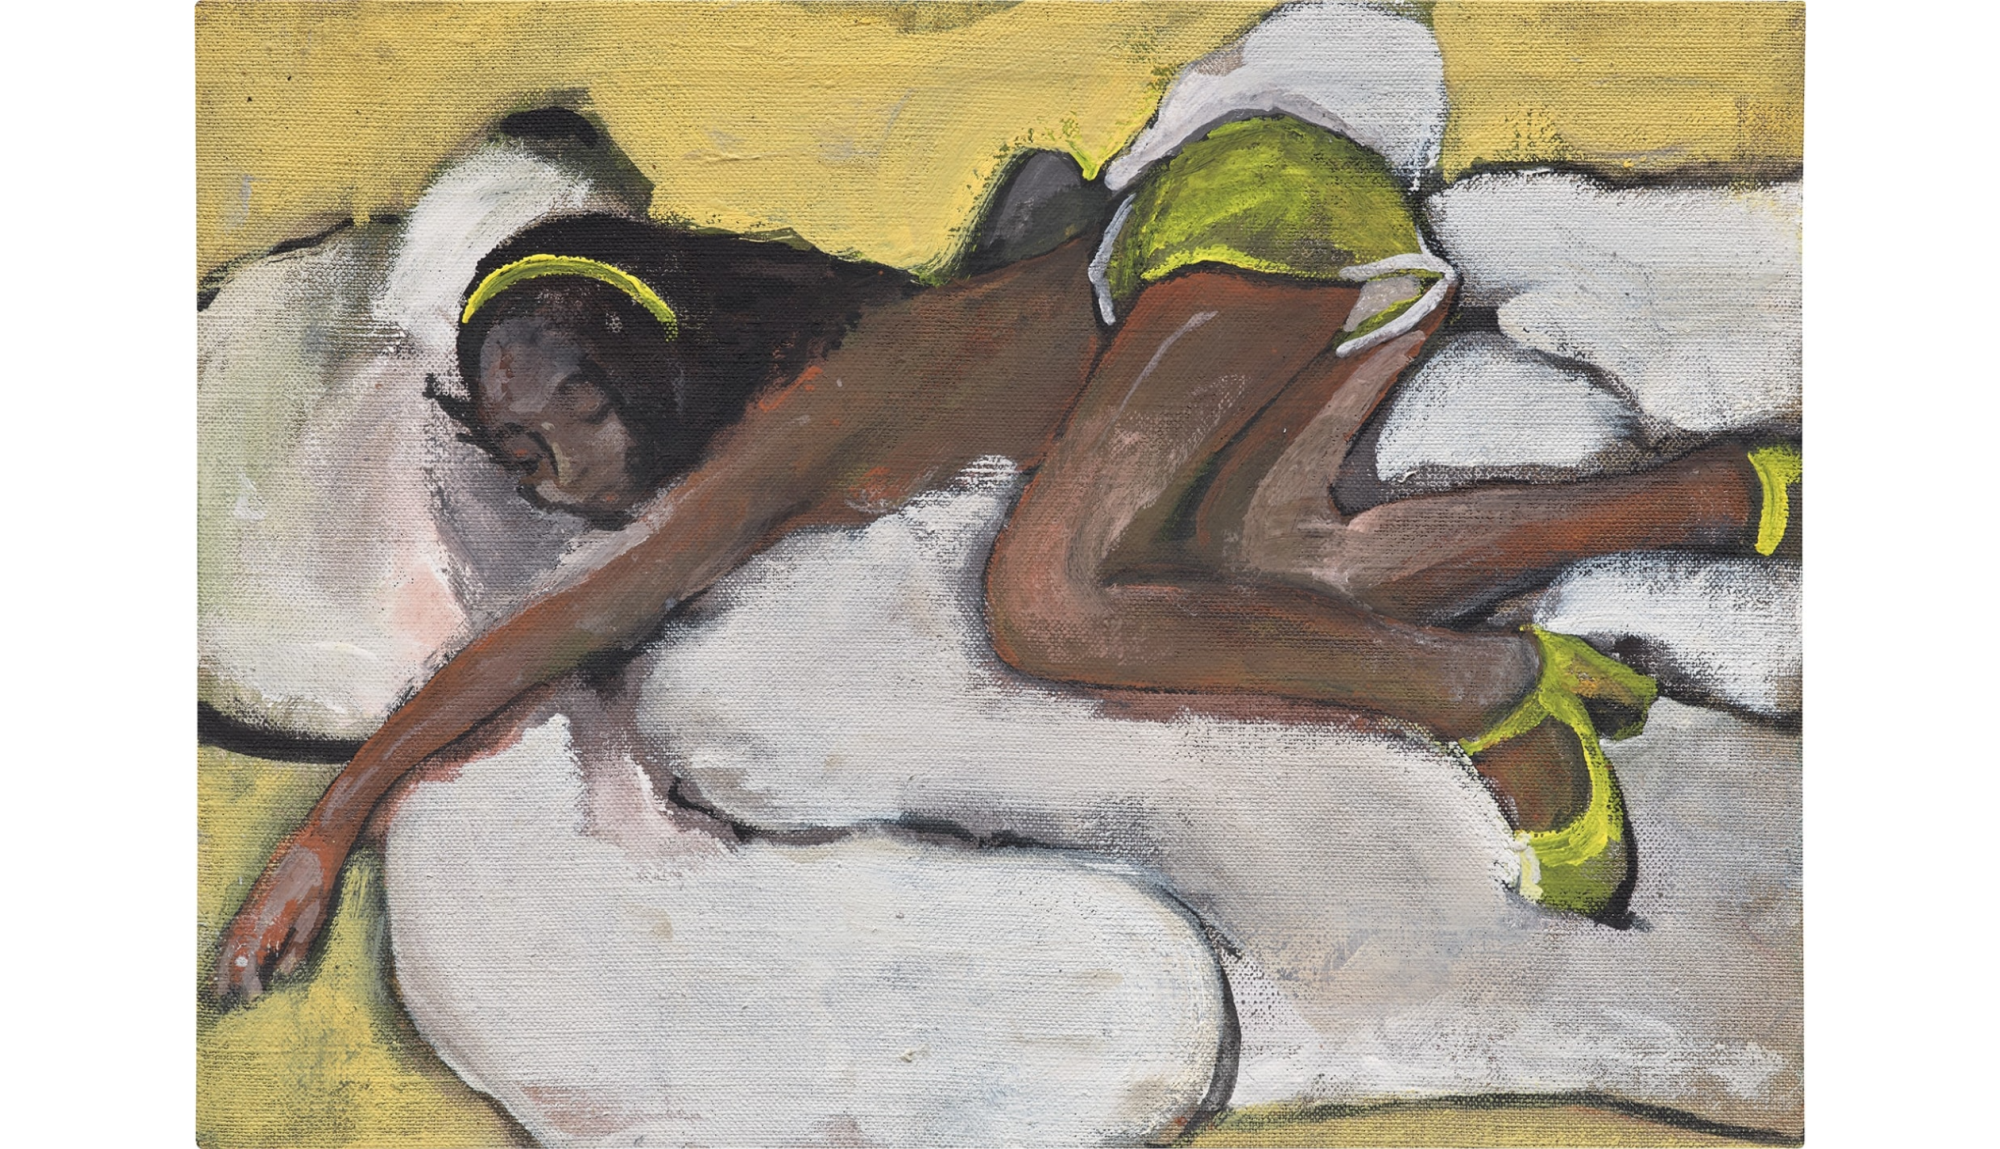 Painting of a Black woman asleep. She has yellow strap heels and yellow shorts on.